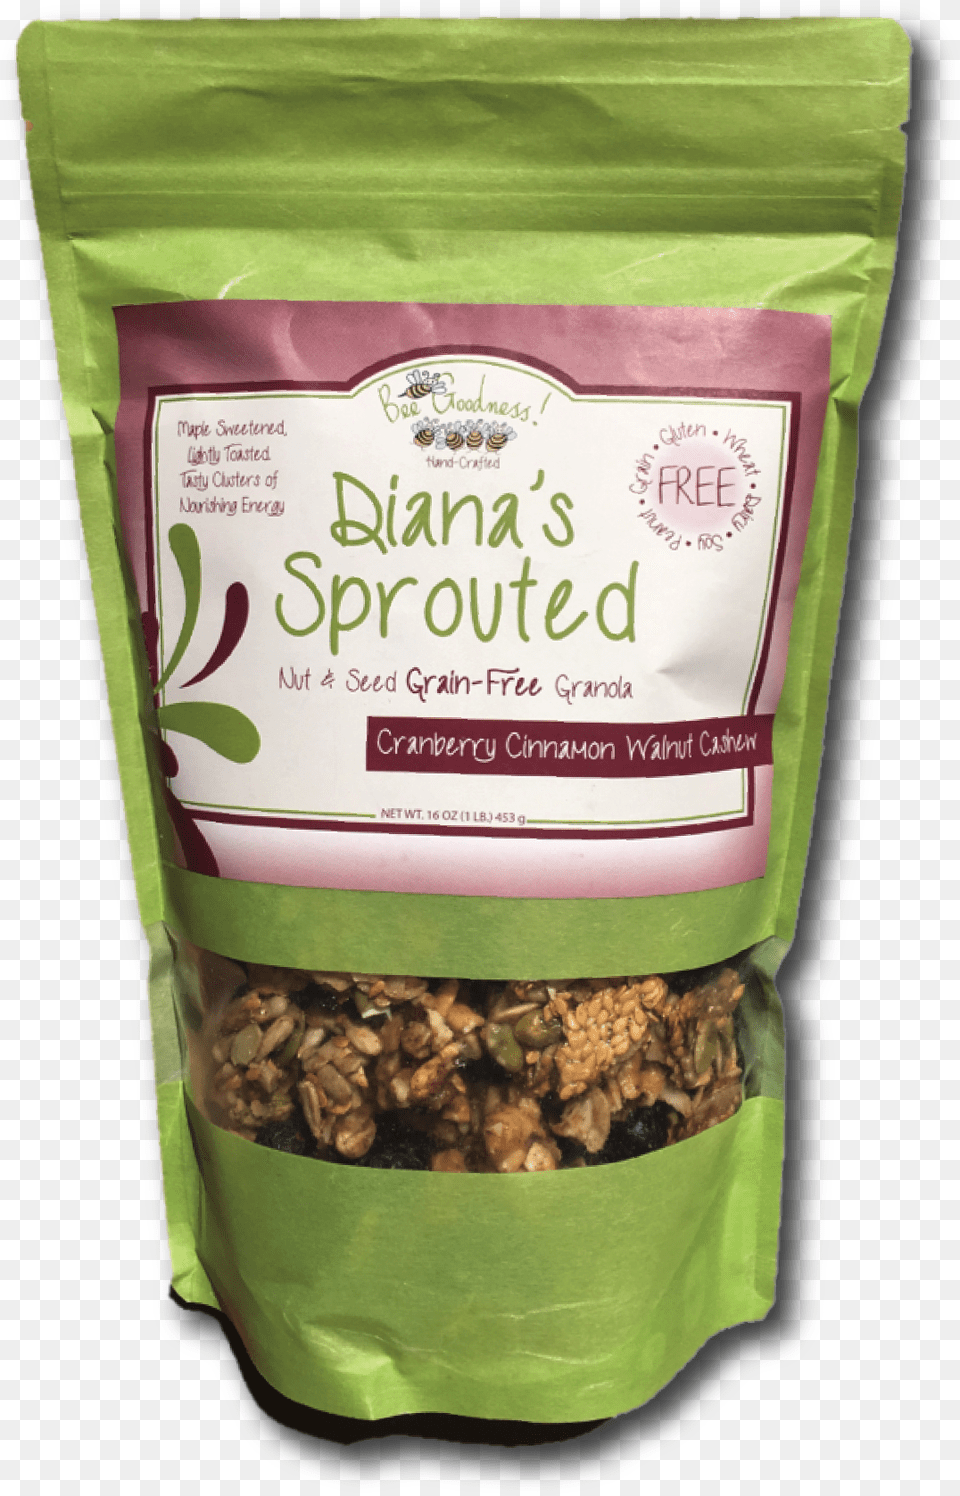 Buy Sprouted Cranberry Cinnamon Walnut Cashew Granola Walnut, Food, Grain, Produce, Ketchup Free Png